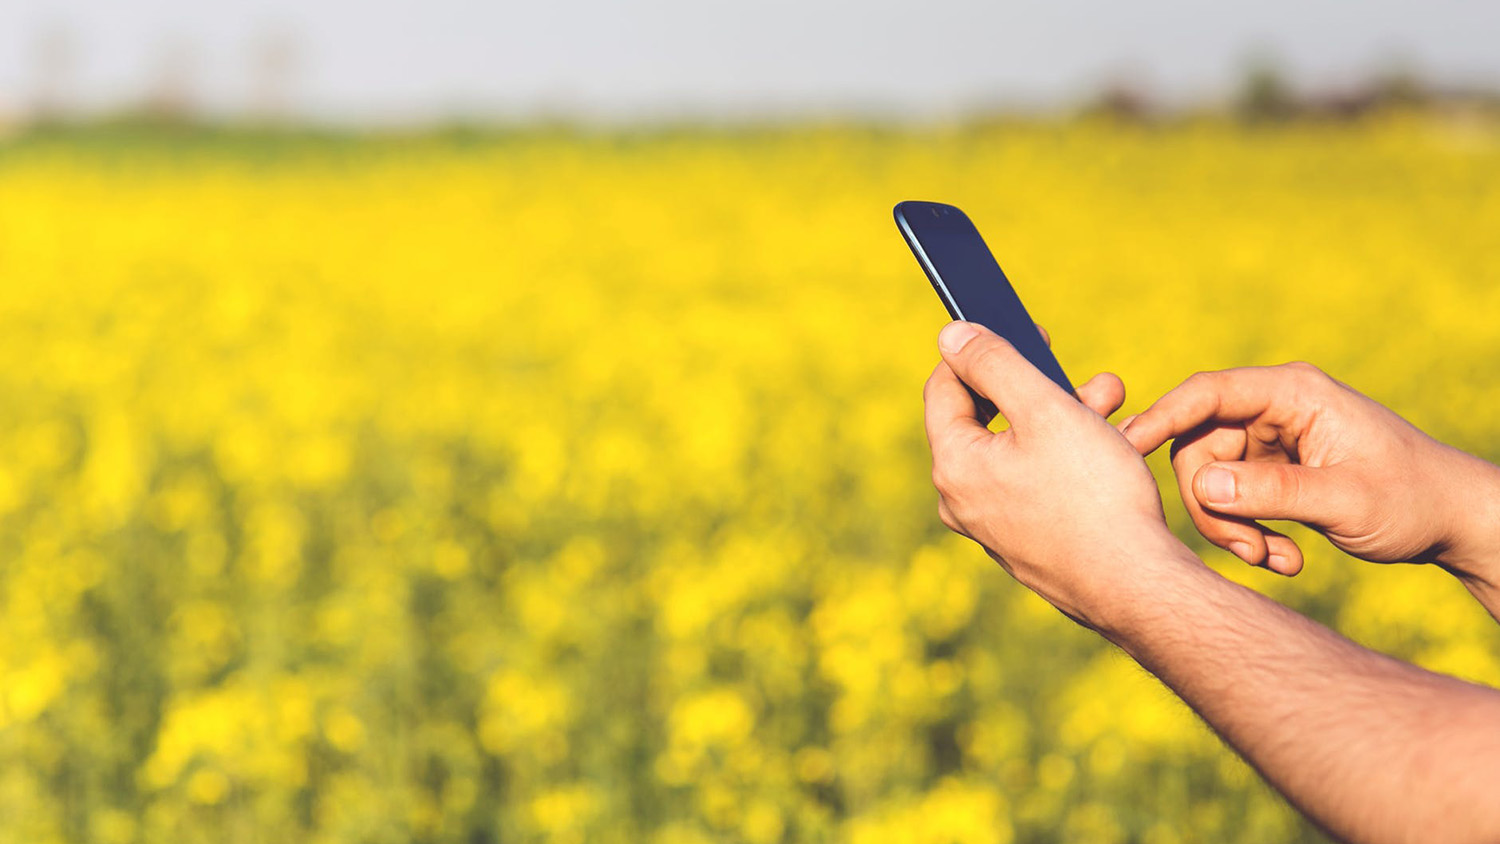 smartphone in front of a field